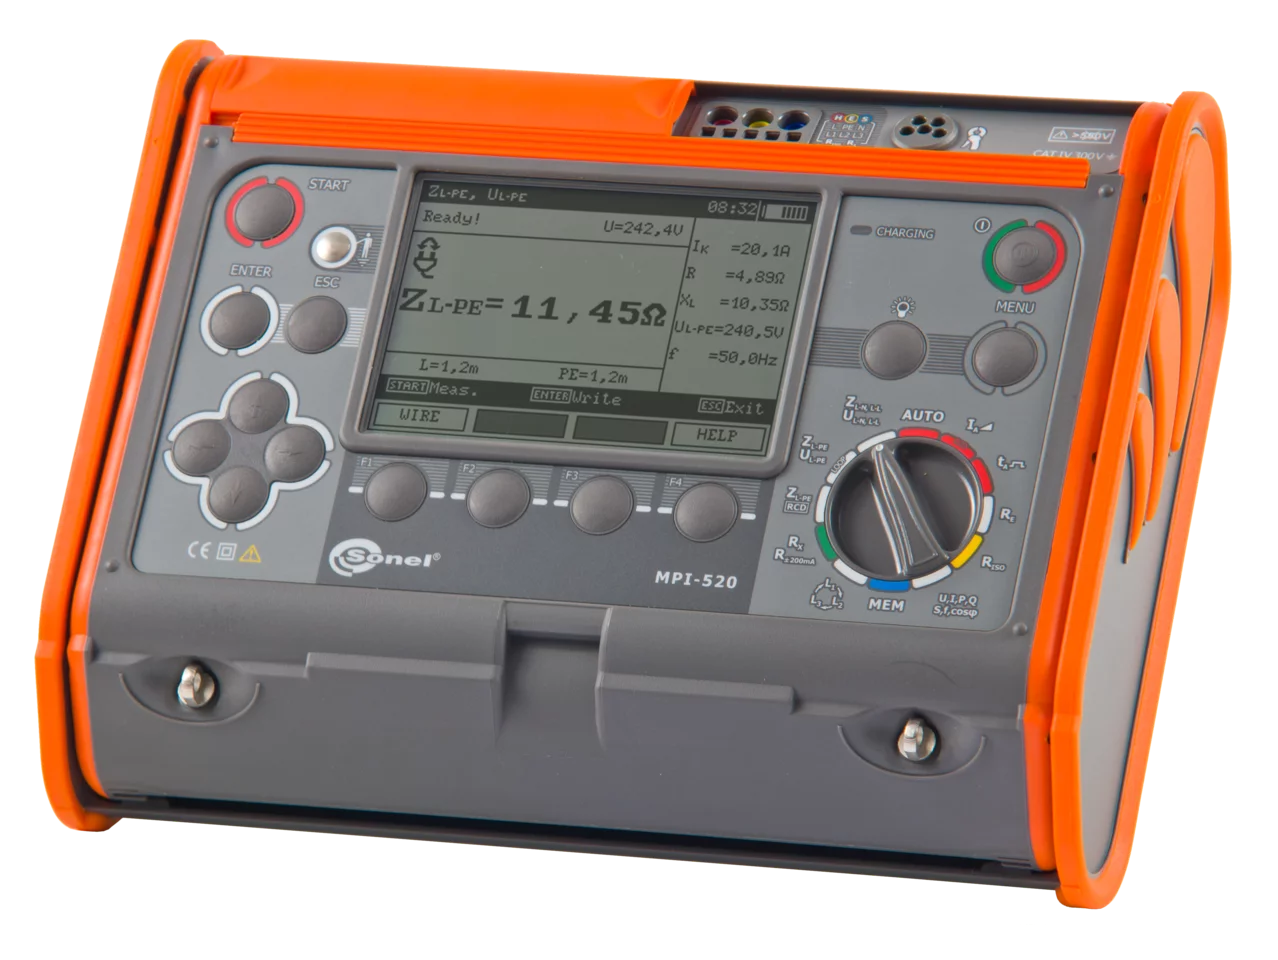 Multi-function meter of electrical system parameters MPI-520-1